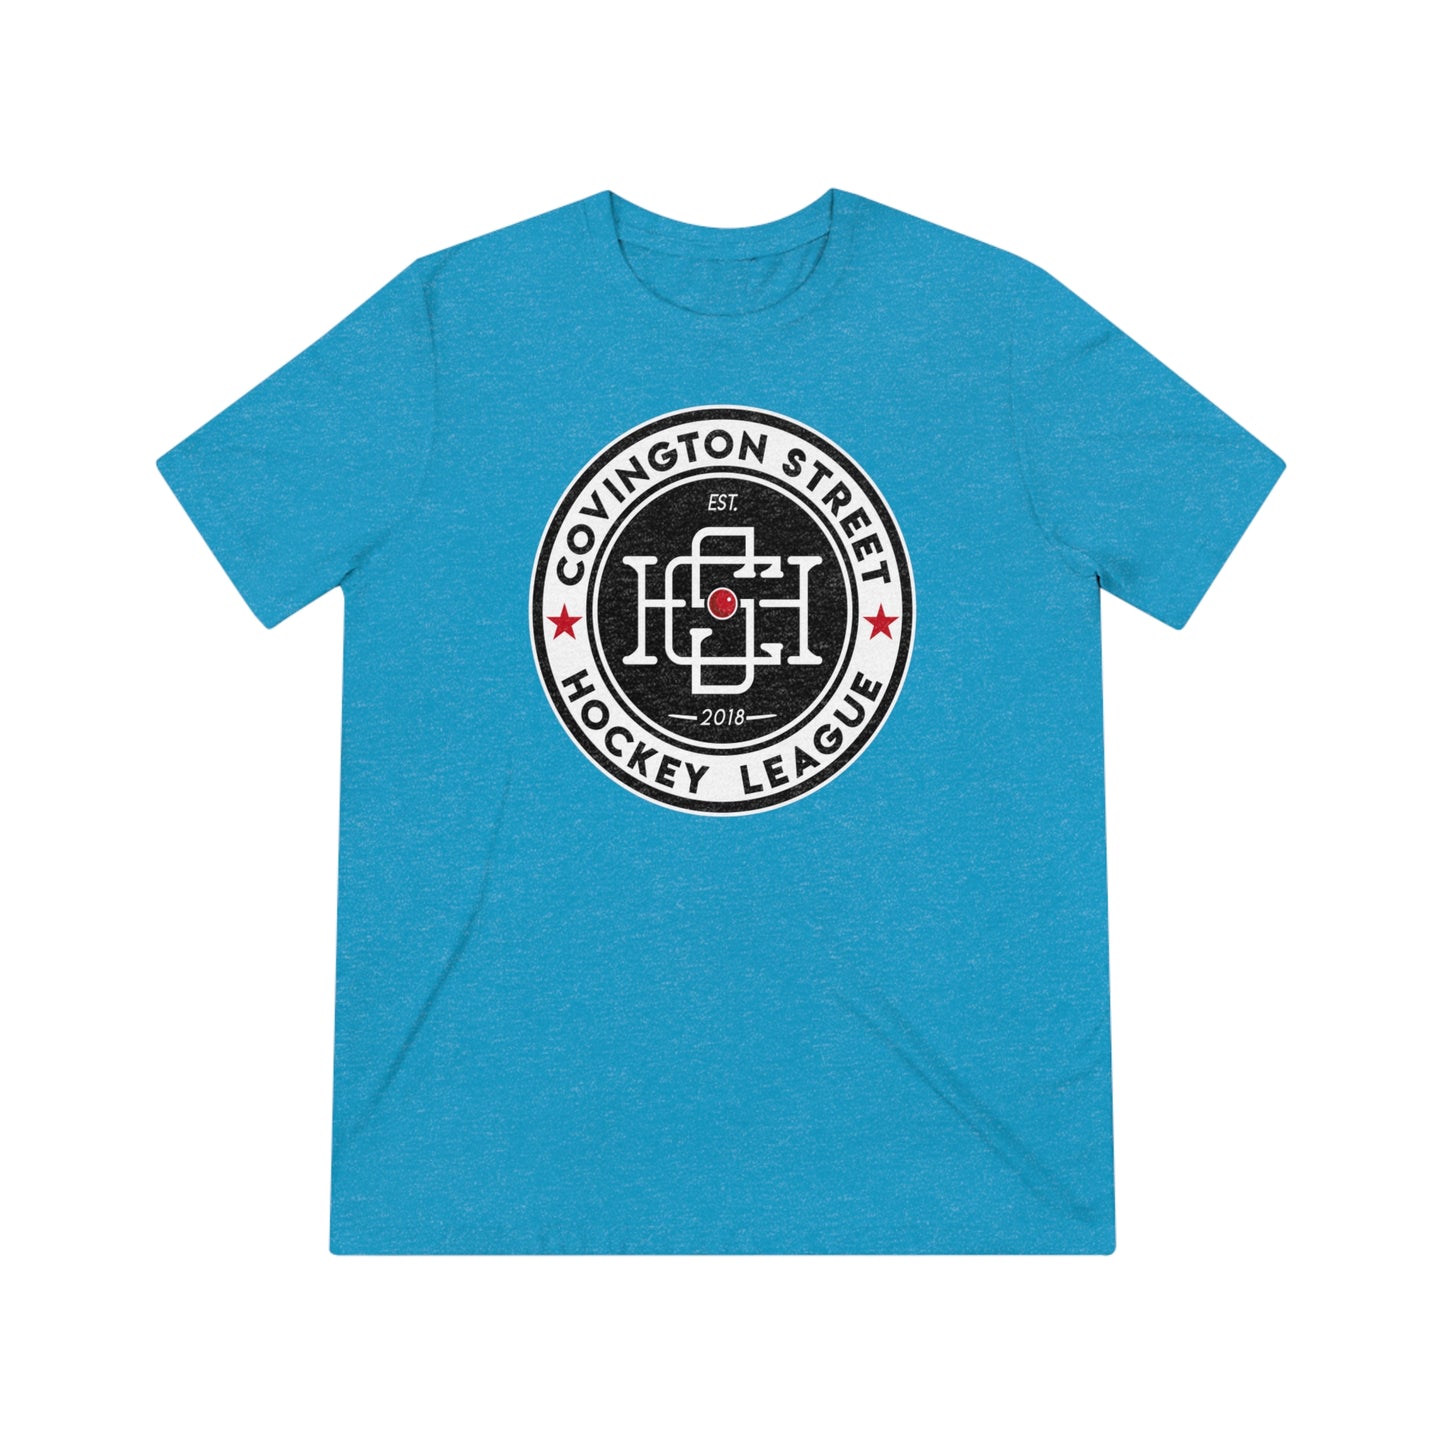 Unisex Triblend Tee | The Official CSHL Logo